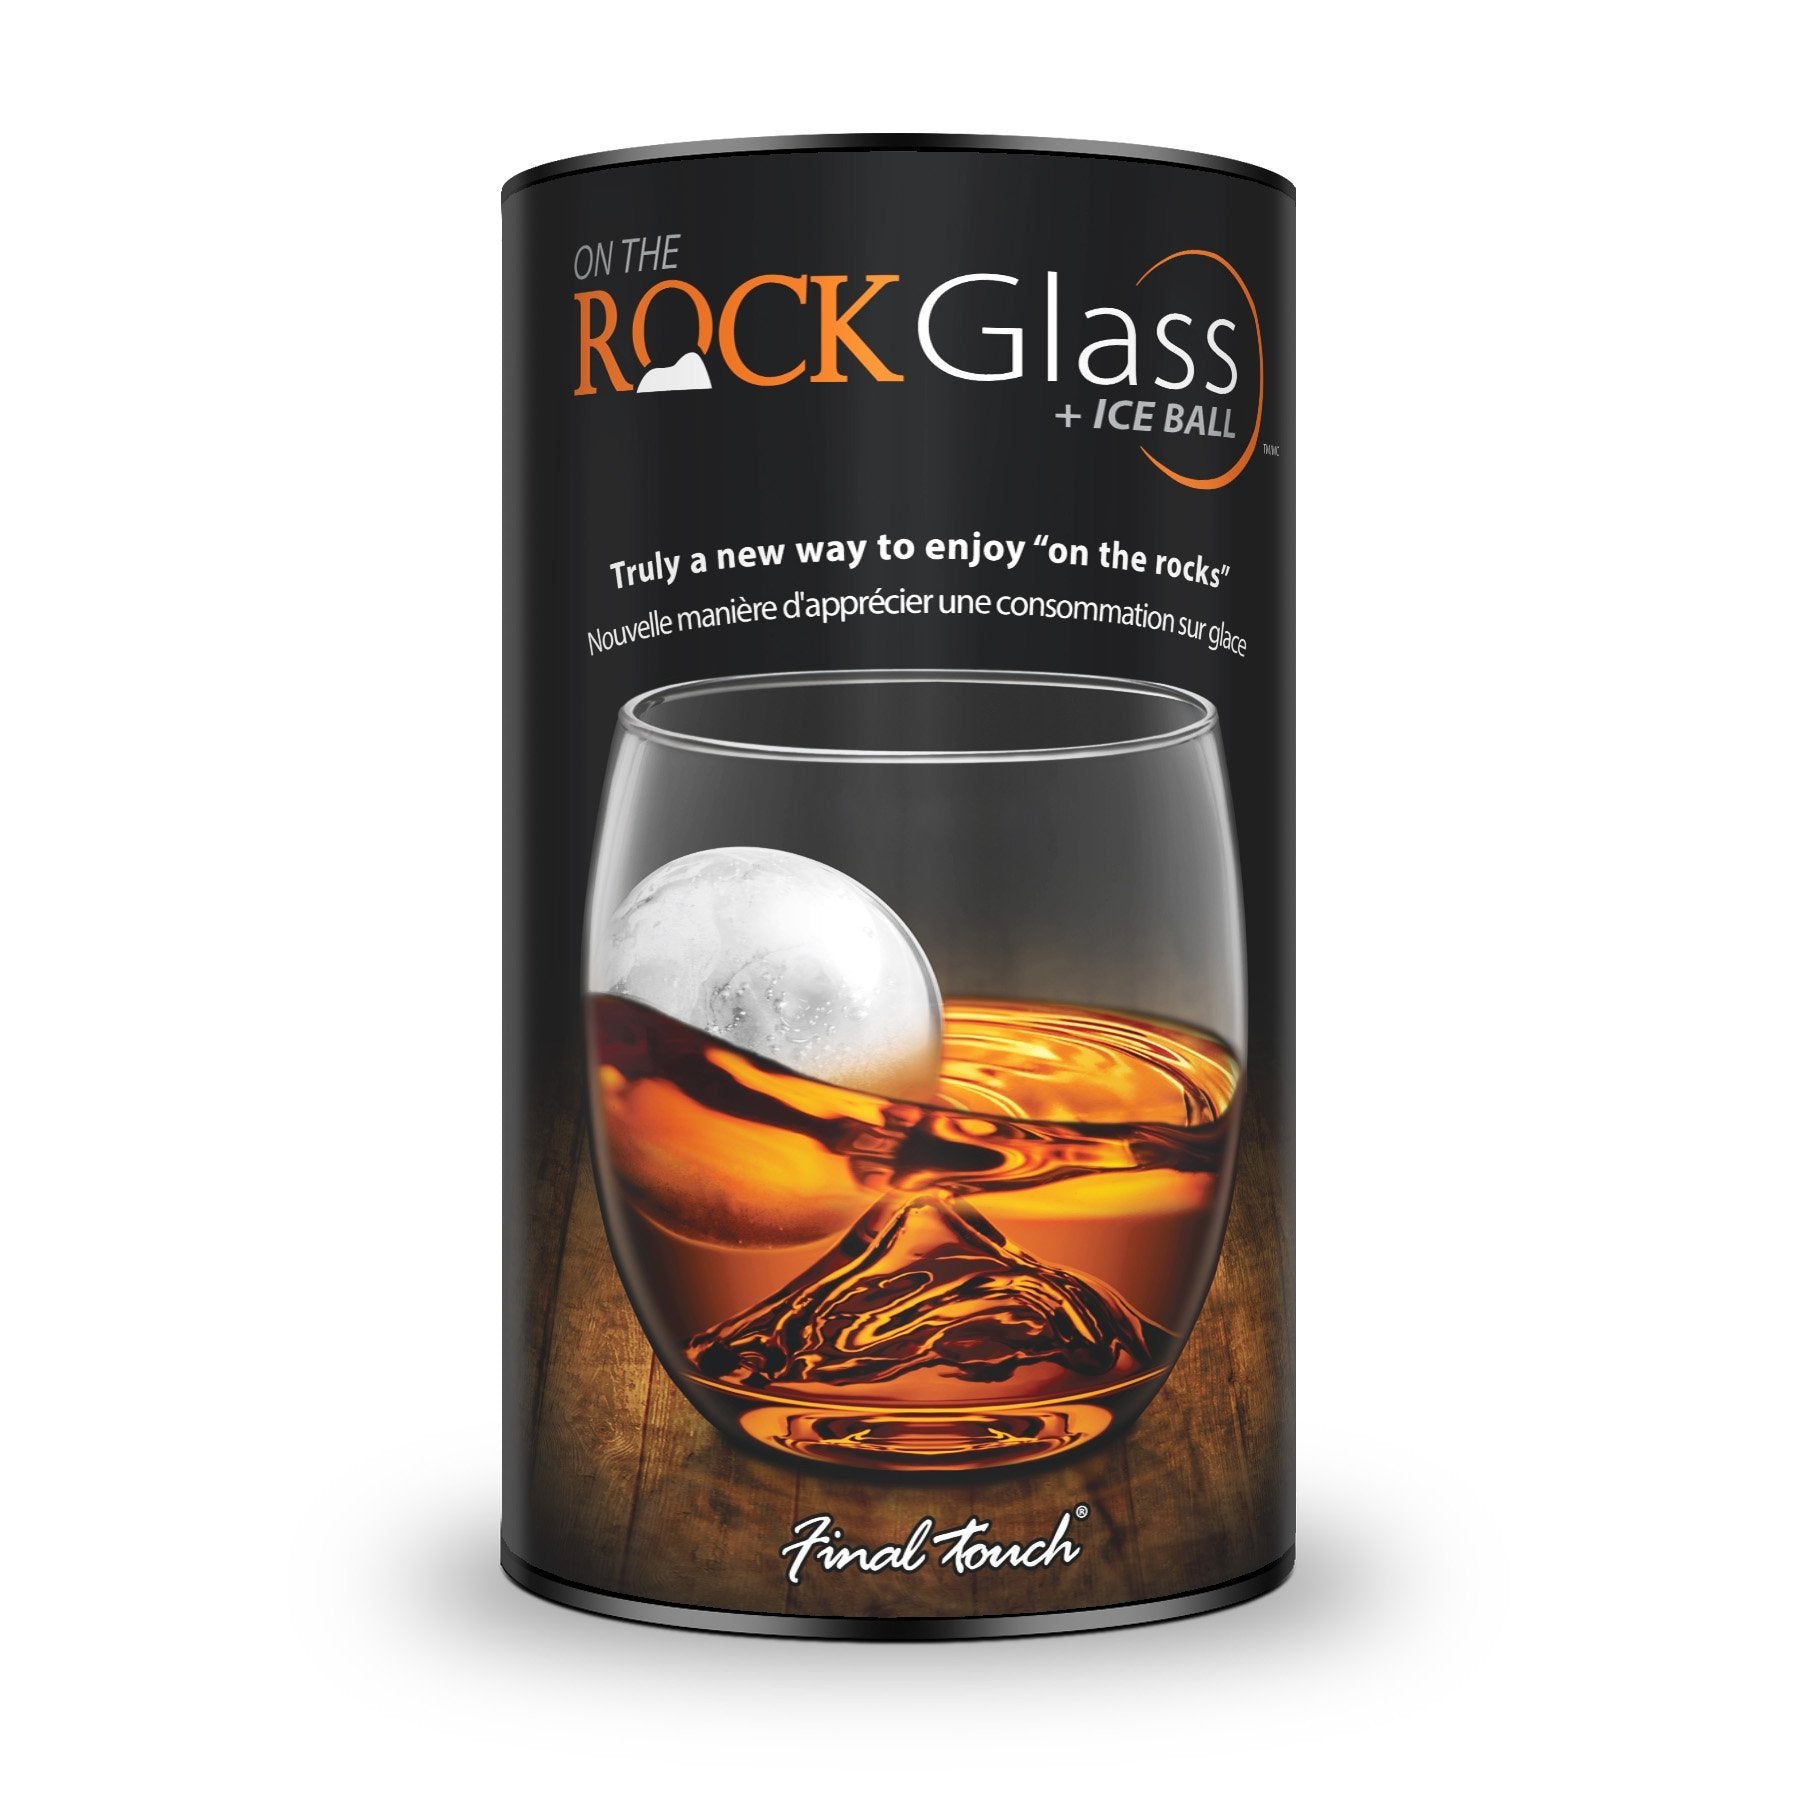 On The Rock Glass with Ice Ball Mould